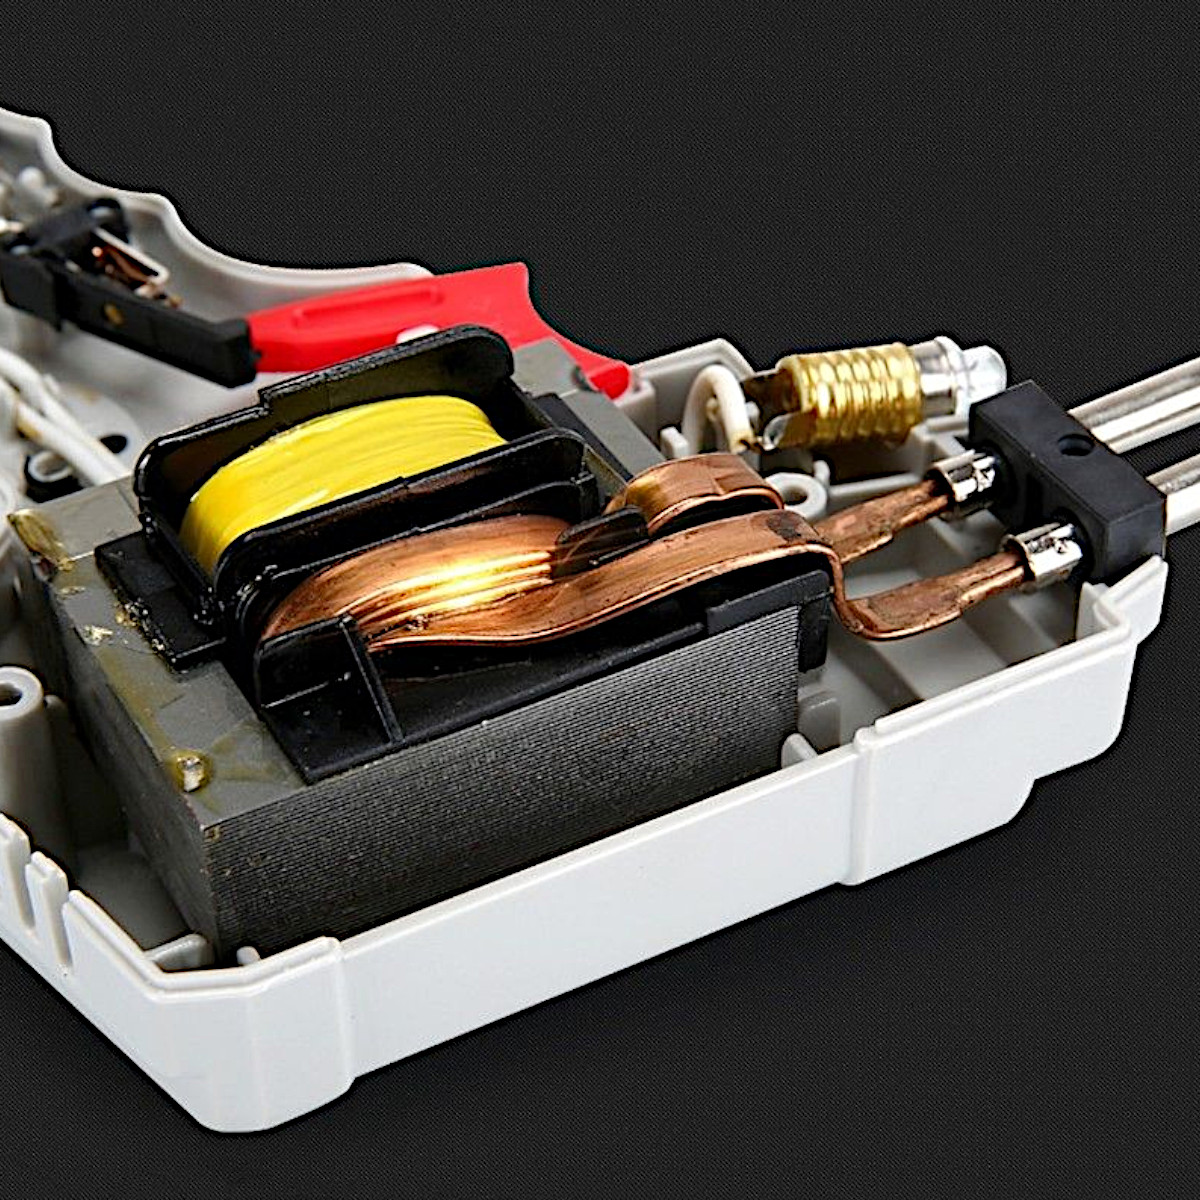 100W-220V-to-240V-Electrical-Soldering-Iron-Fast-Electric-Welding-Solder-Tool-EU-Plug-1393550-4